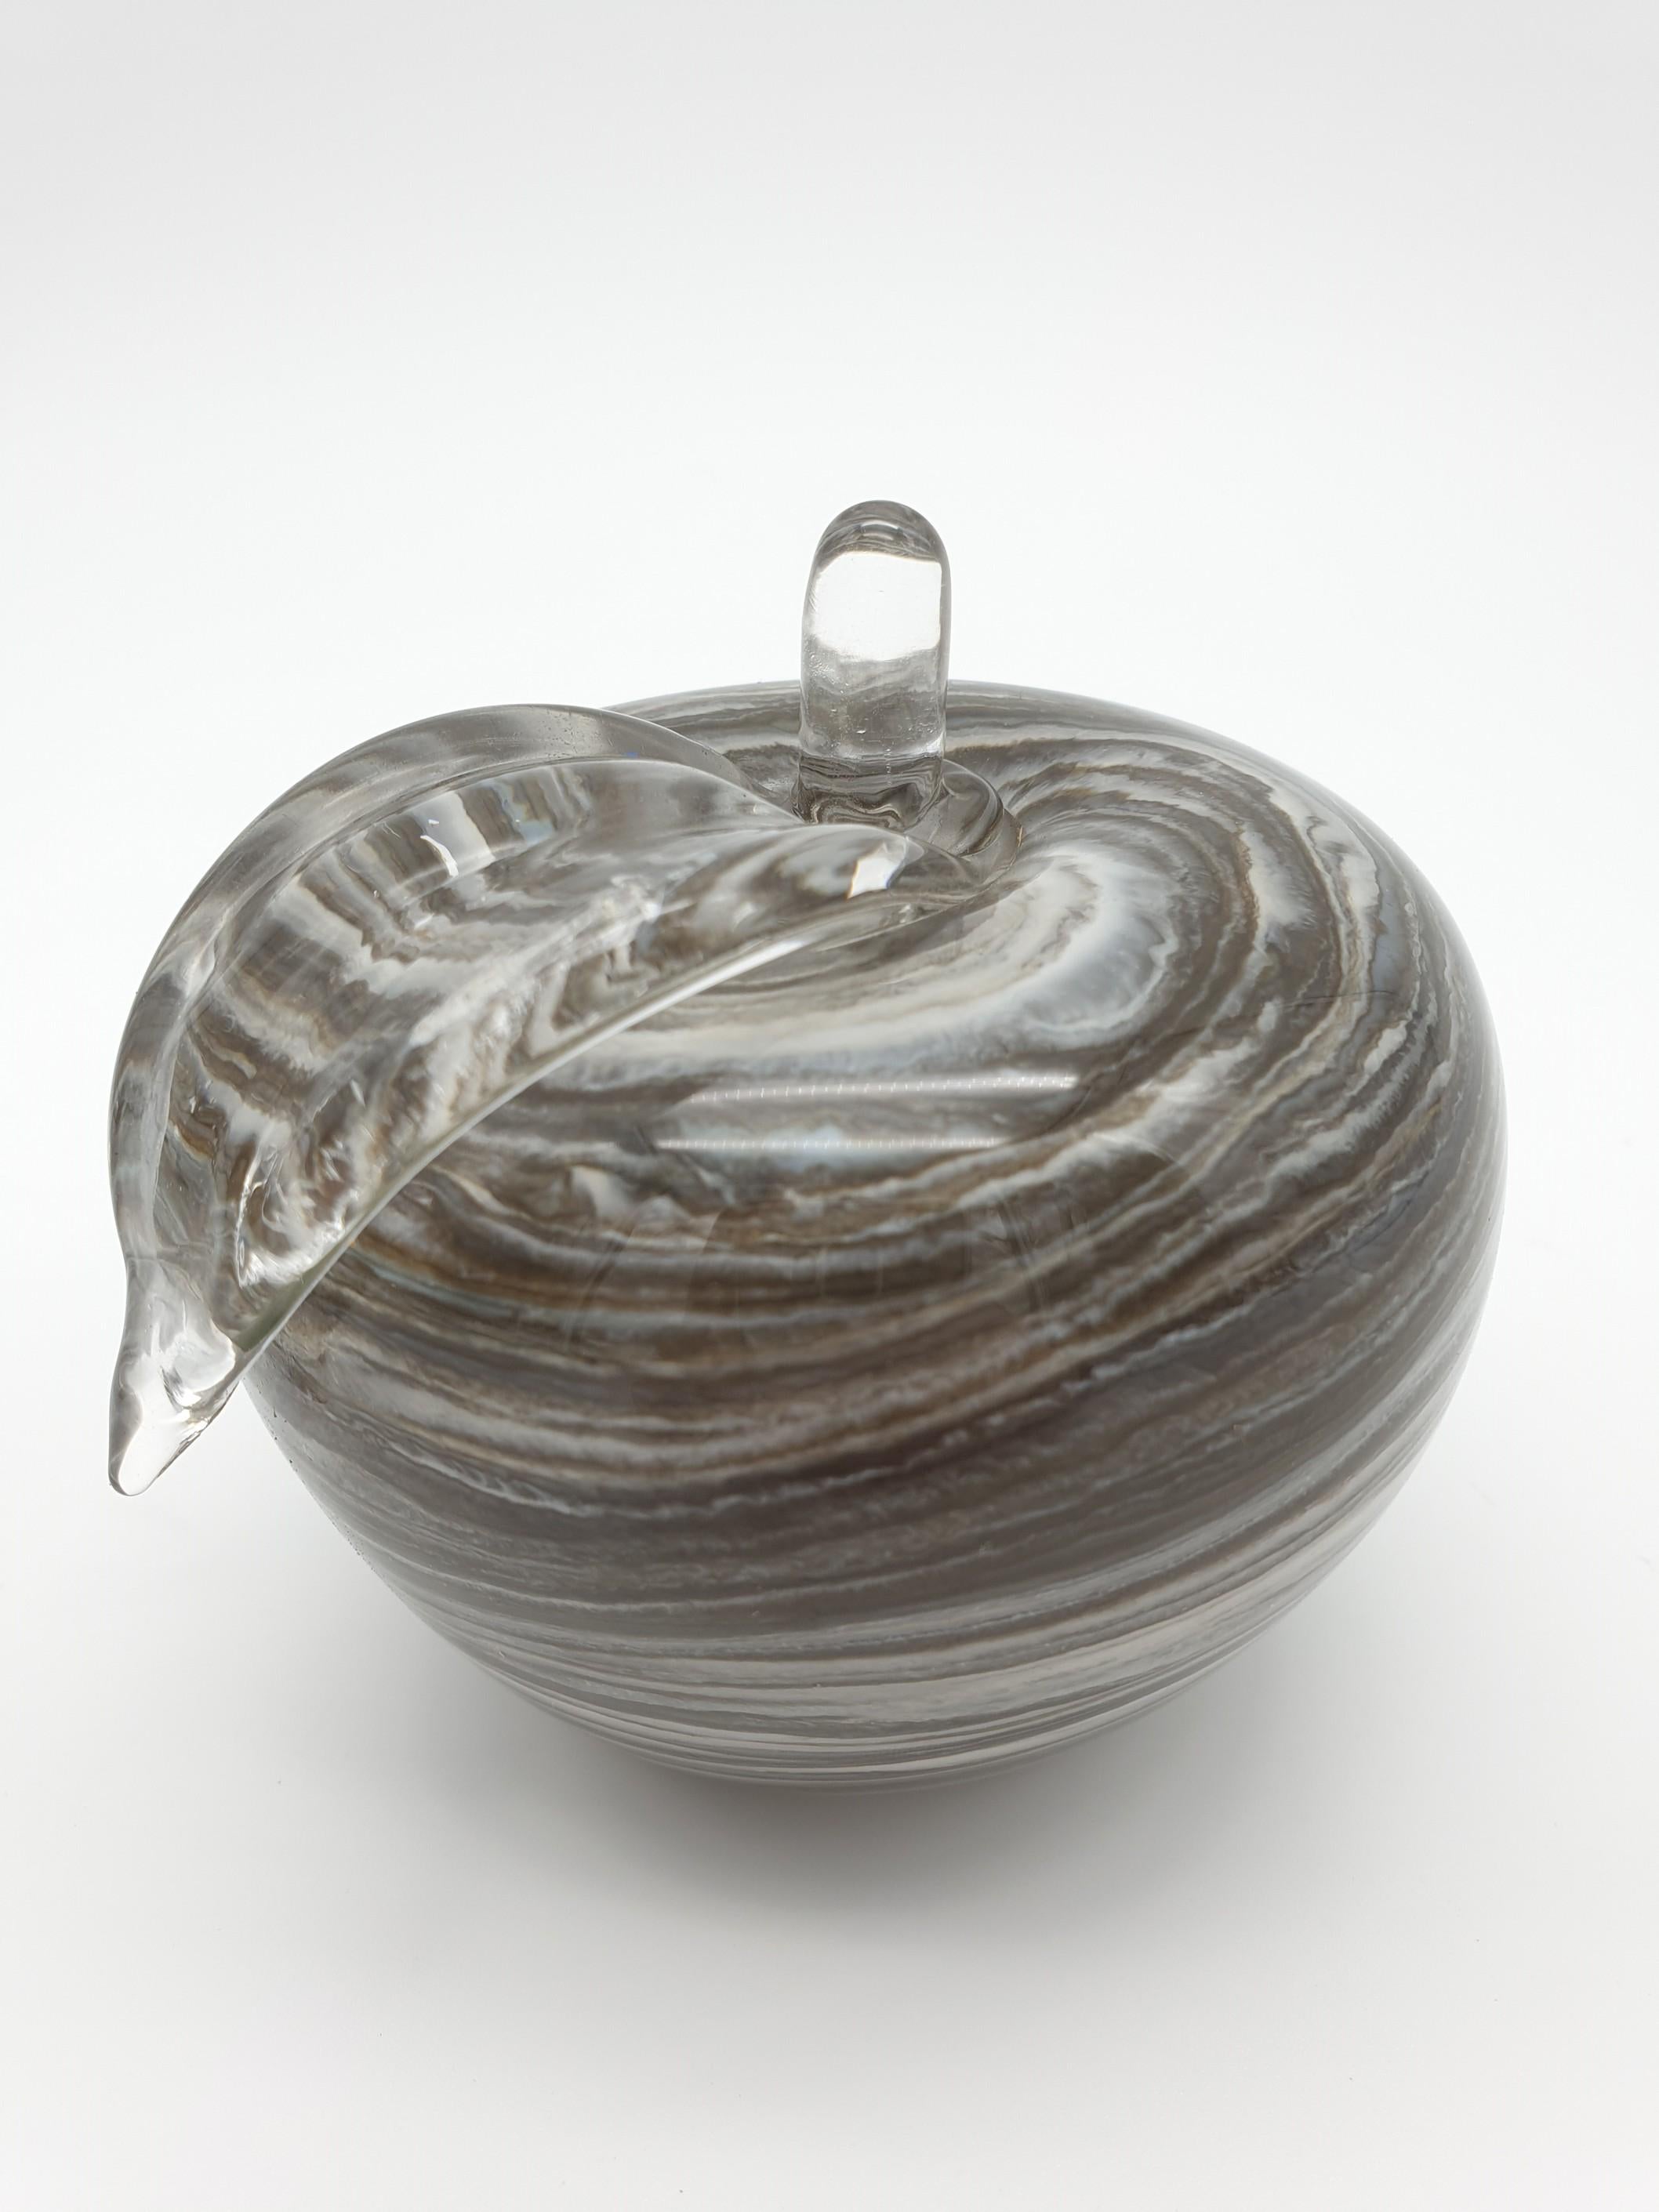 Modern Murano Glass Decorative Apple and Pear, Marbled Gray Color, late 1990s For Sale 3